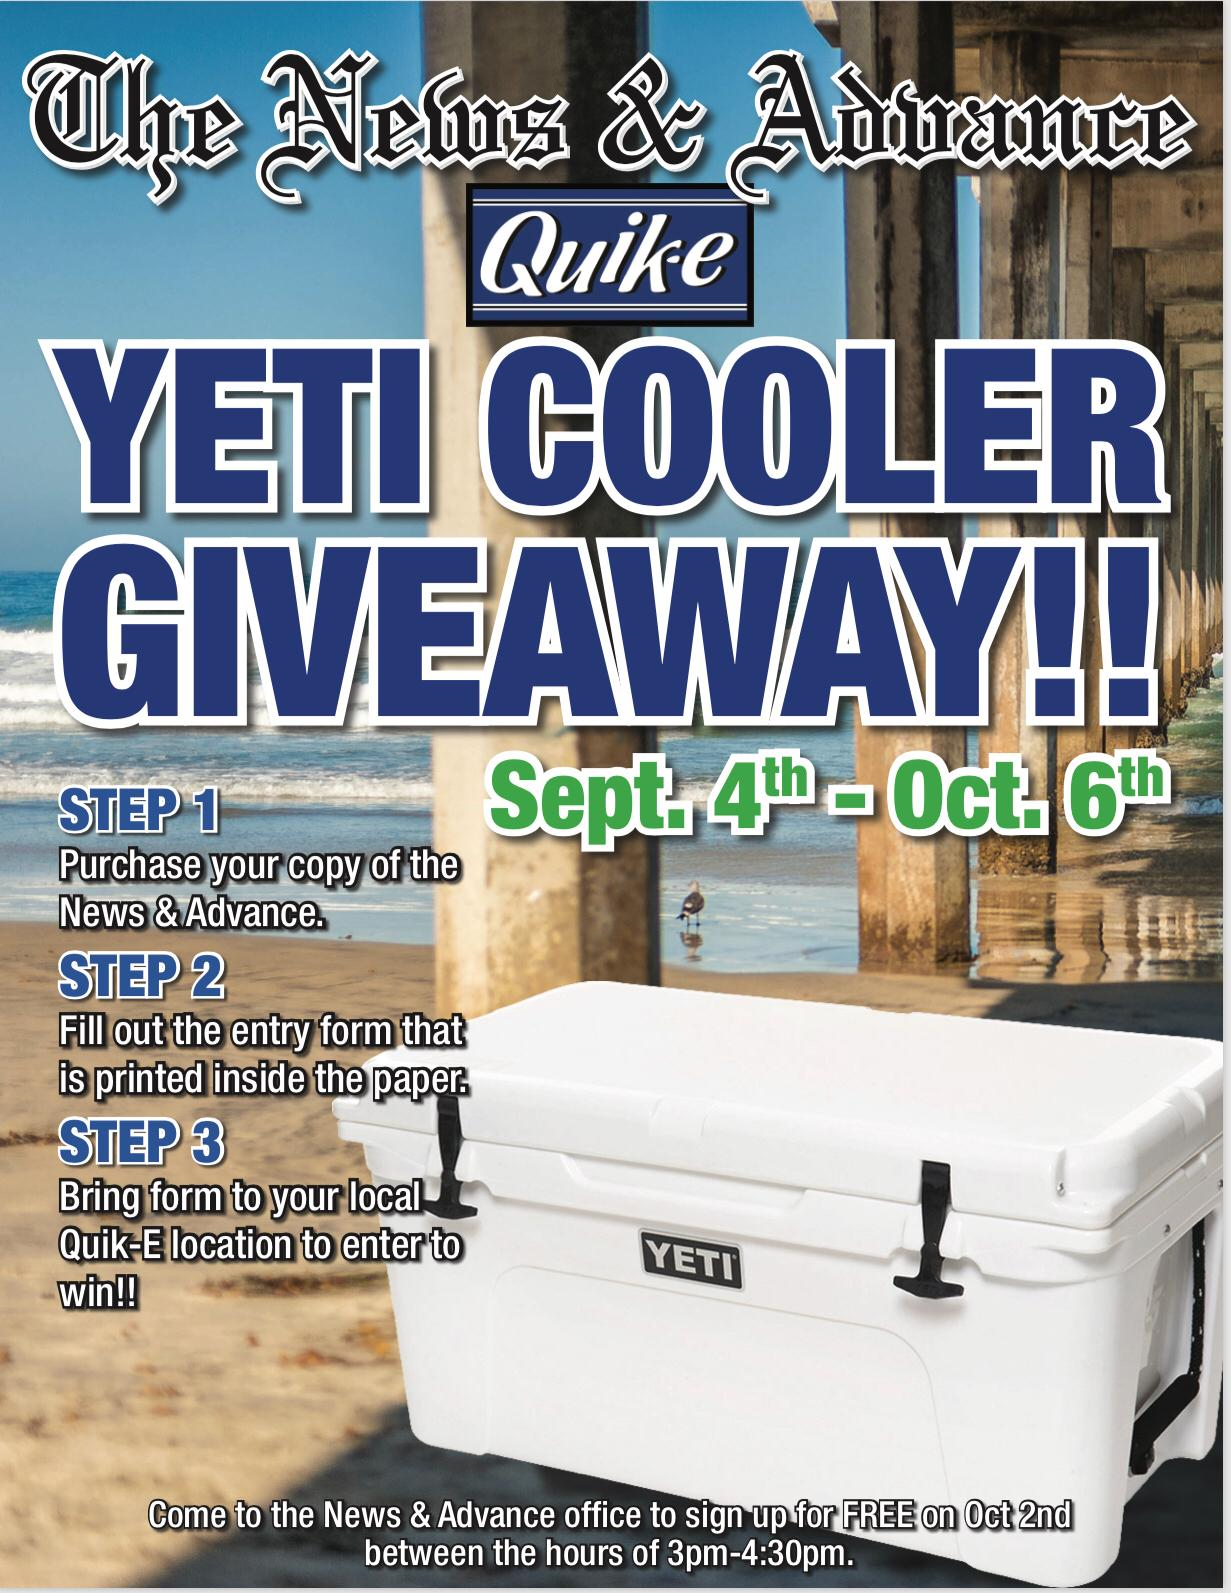 Idea #40 of 50 Days of Ideas! YETI COOLER GIVEAWAY!